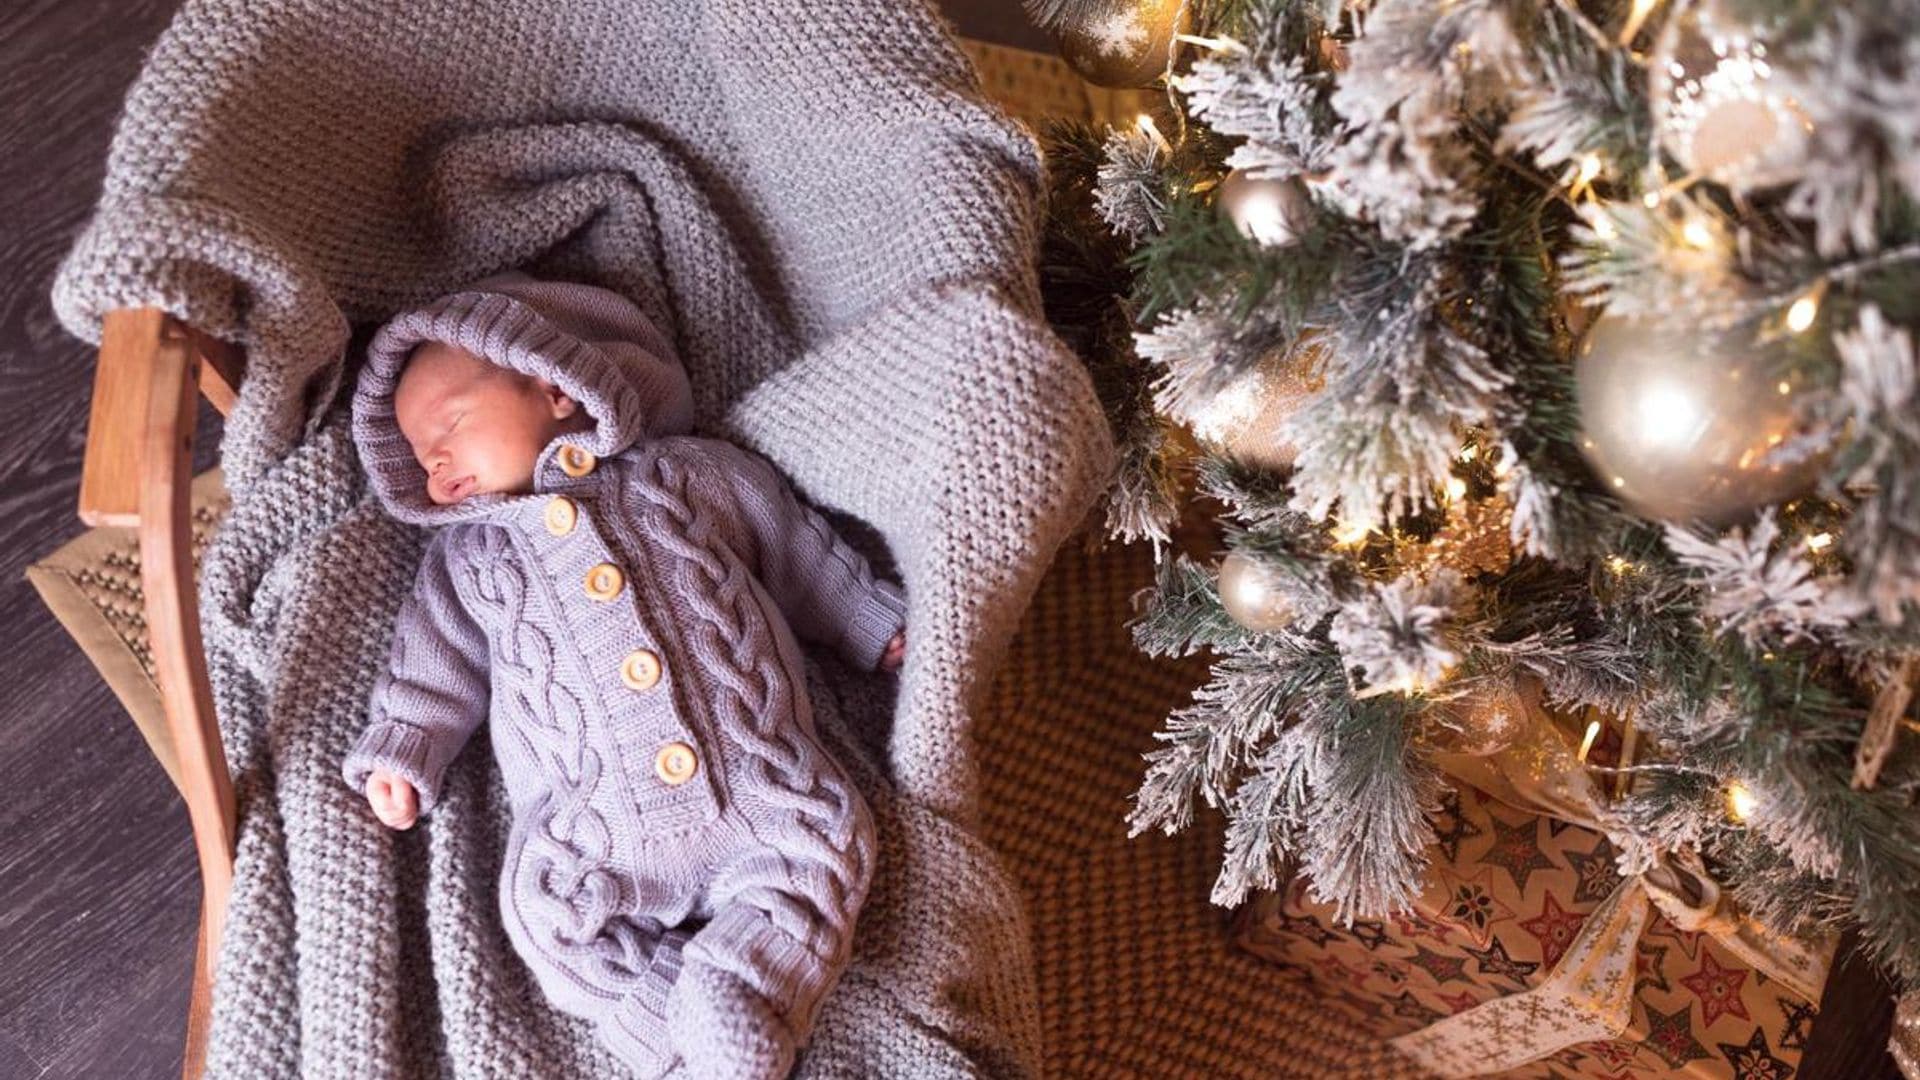 Holiday-inspired baby names that will make their lives jolly all year round